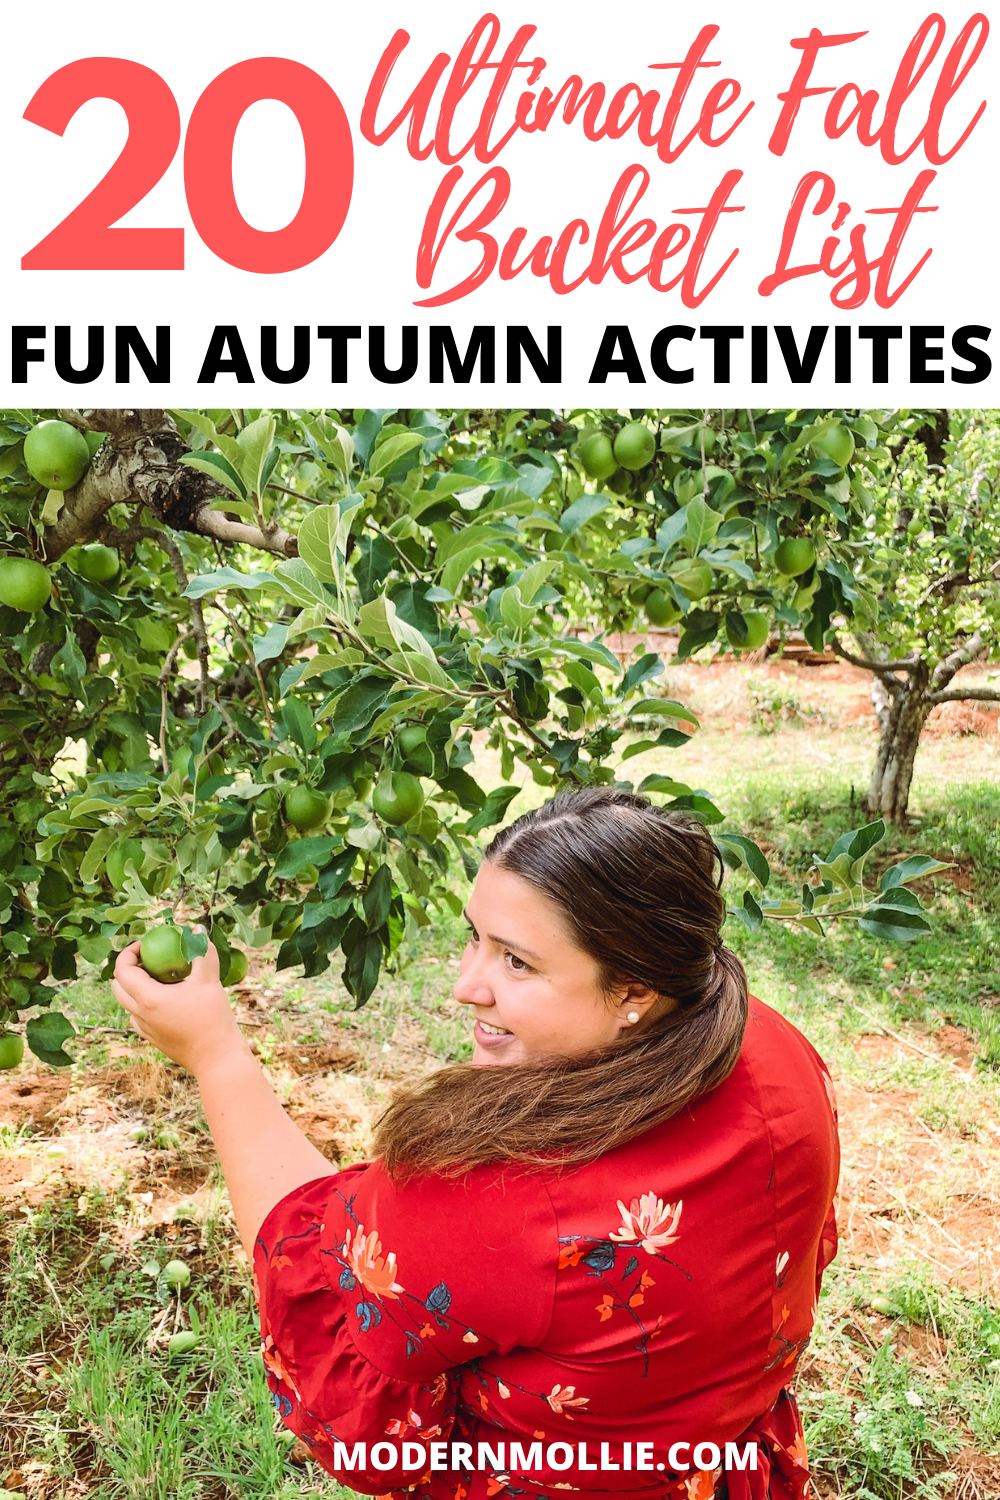 The Ultimate Fall Bucket List: 20 Fun Activities To Try This Autumn